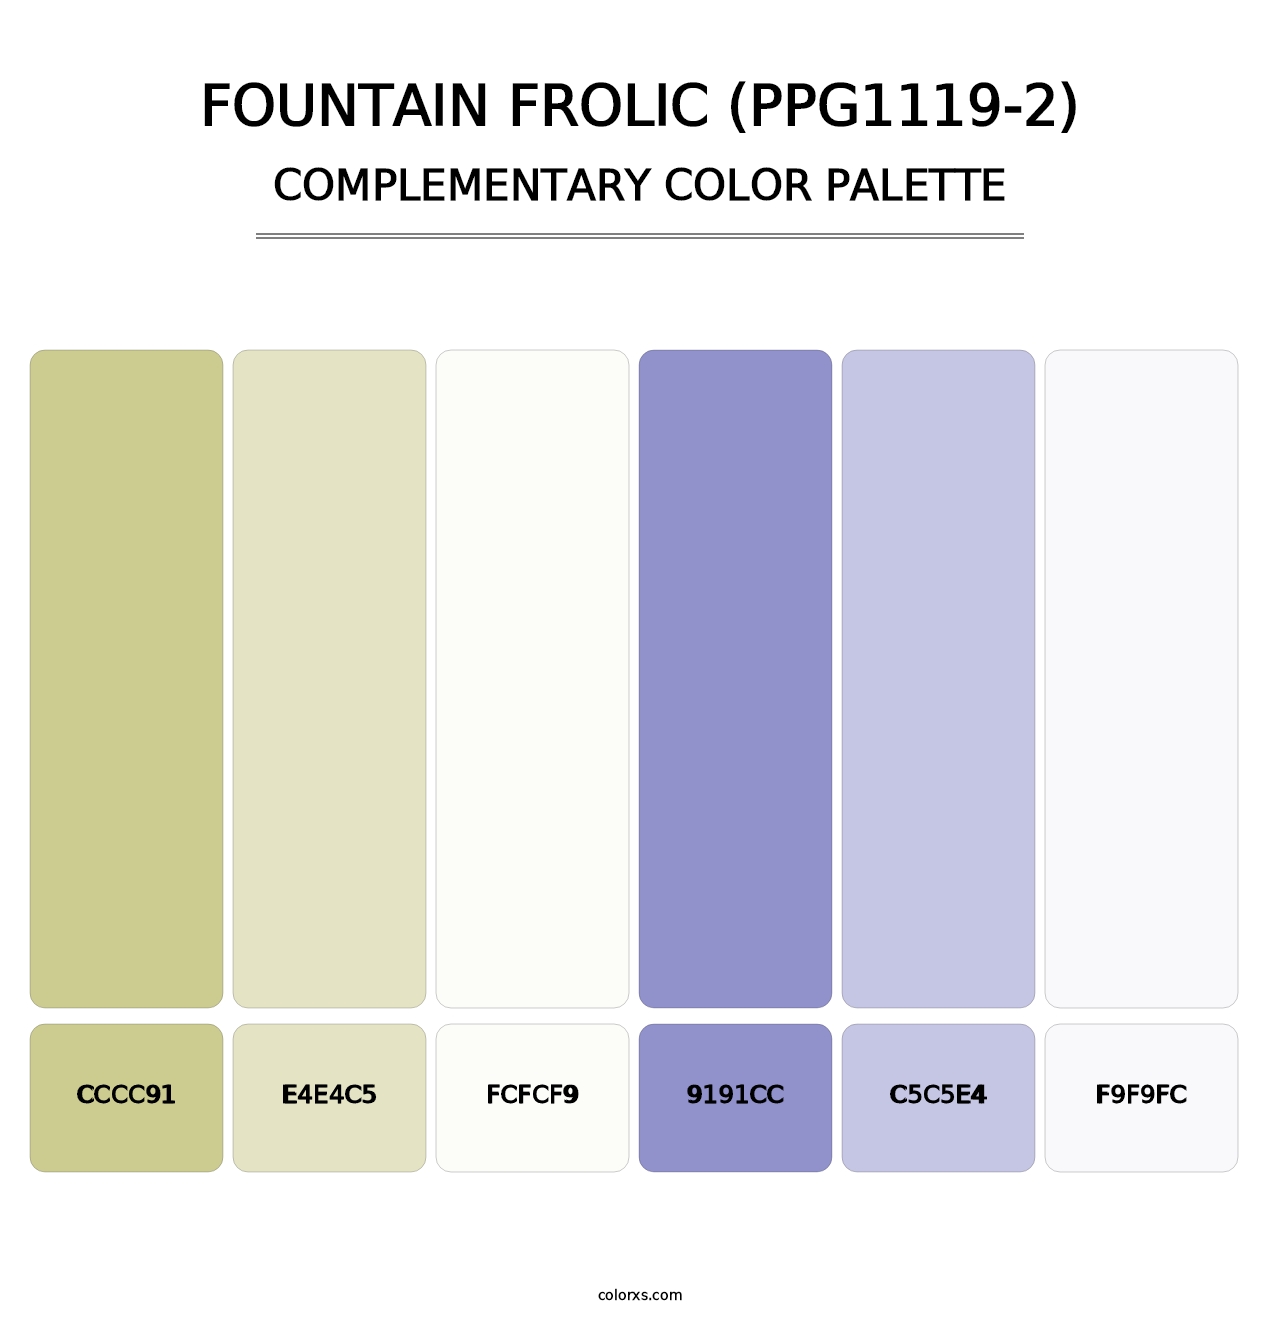 Fountain Frolic (PPG1119-2) - Complementary Color Palette